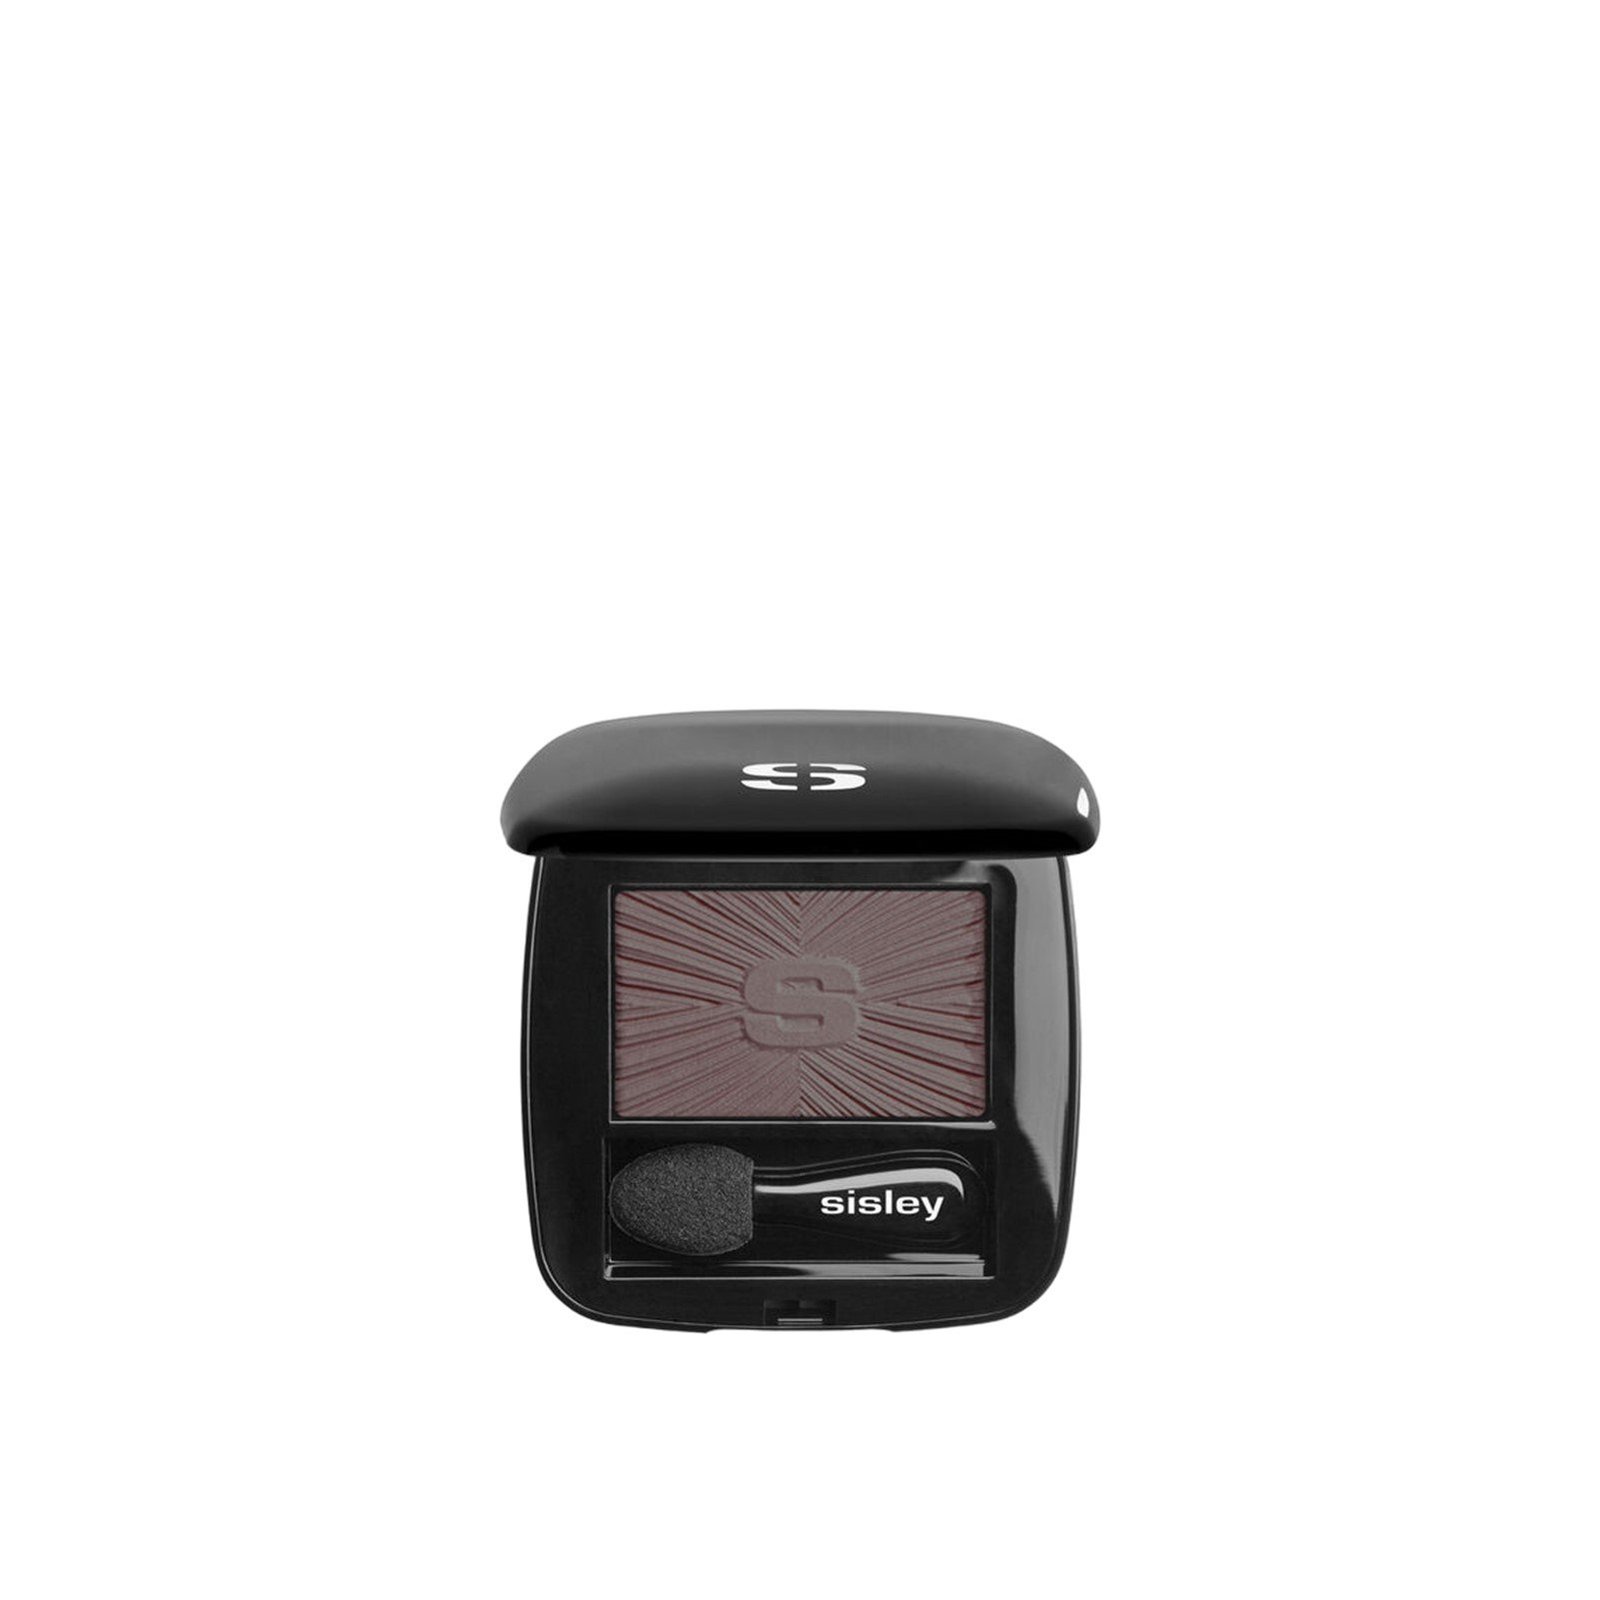 Sisley Paris Les Phyto-Ombres Long Lasting Radiant Eyeshadow 15 Mat Taupe 1.5g (0.05 oz)